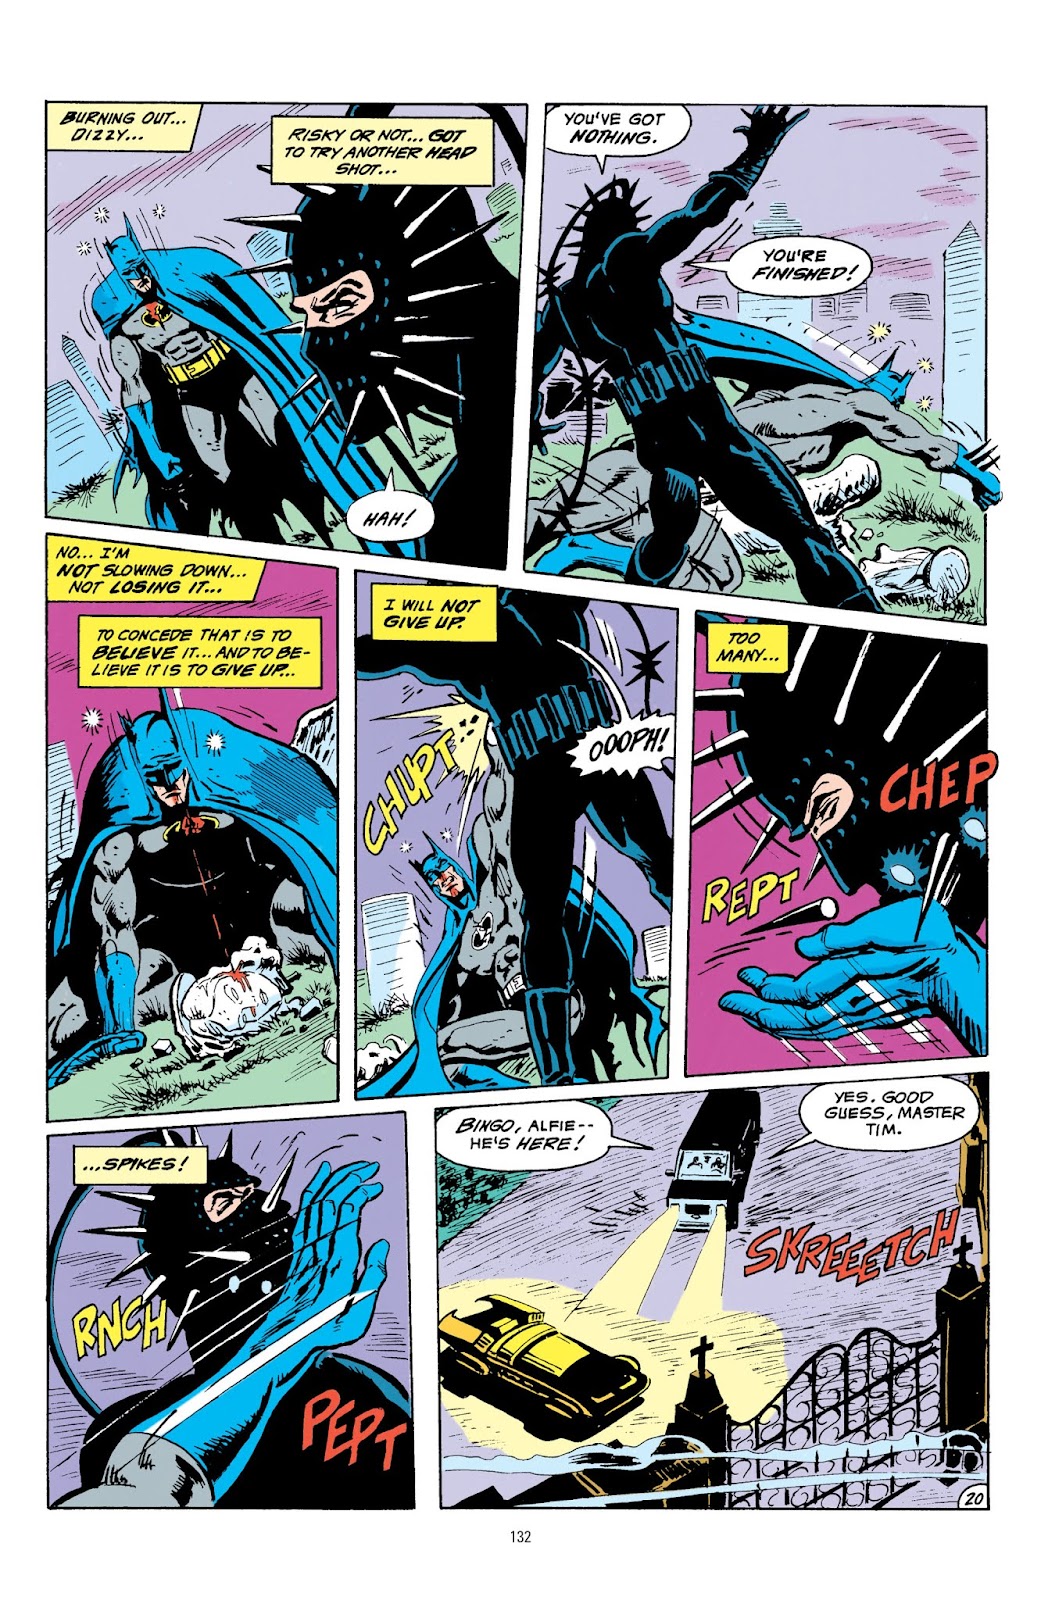 Read Batman: Prelude To Knightfall Issue #TPB (Part 2) Online Page 32